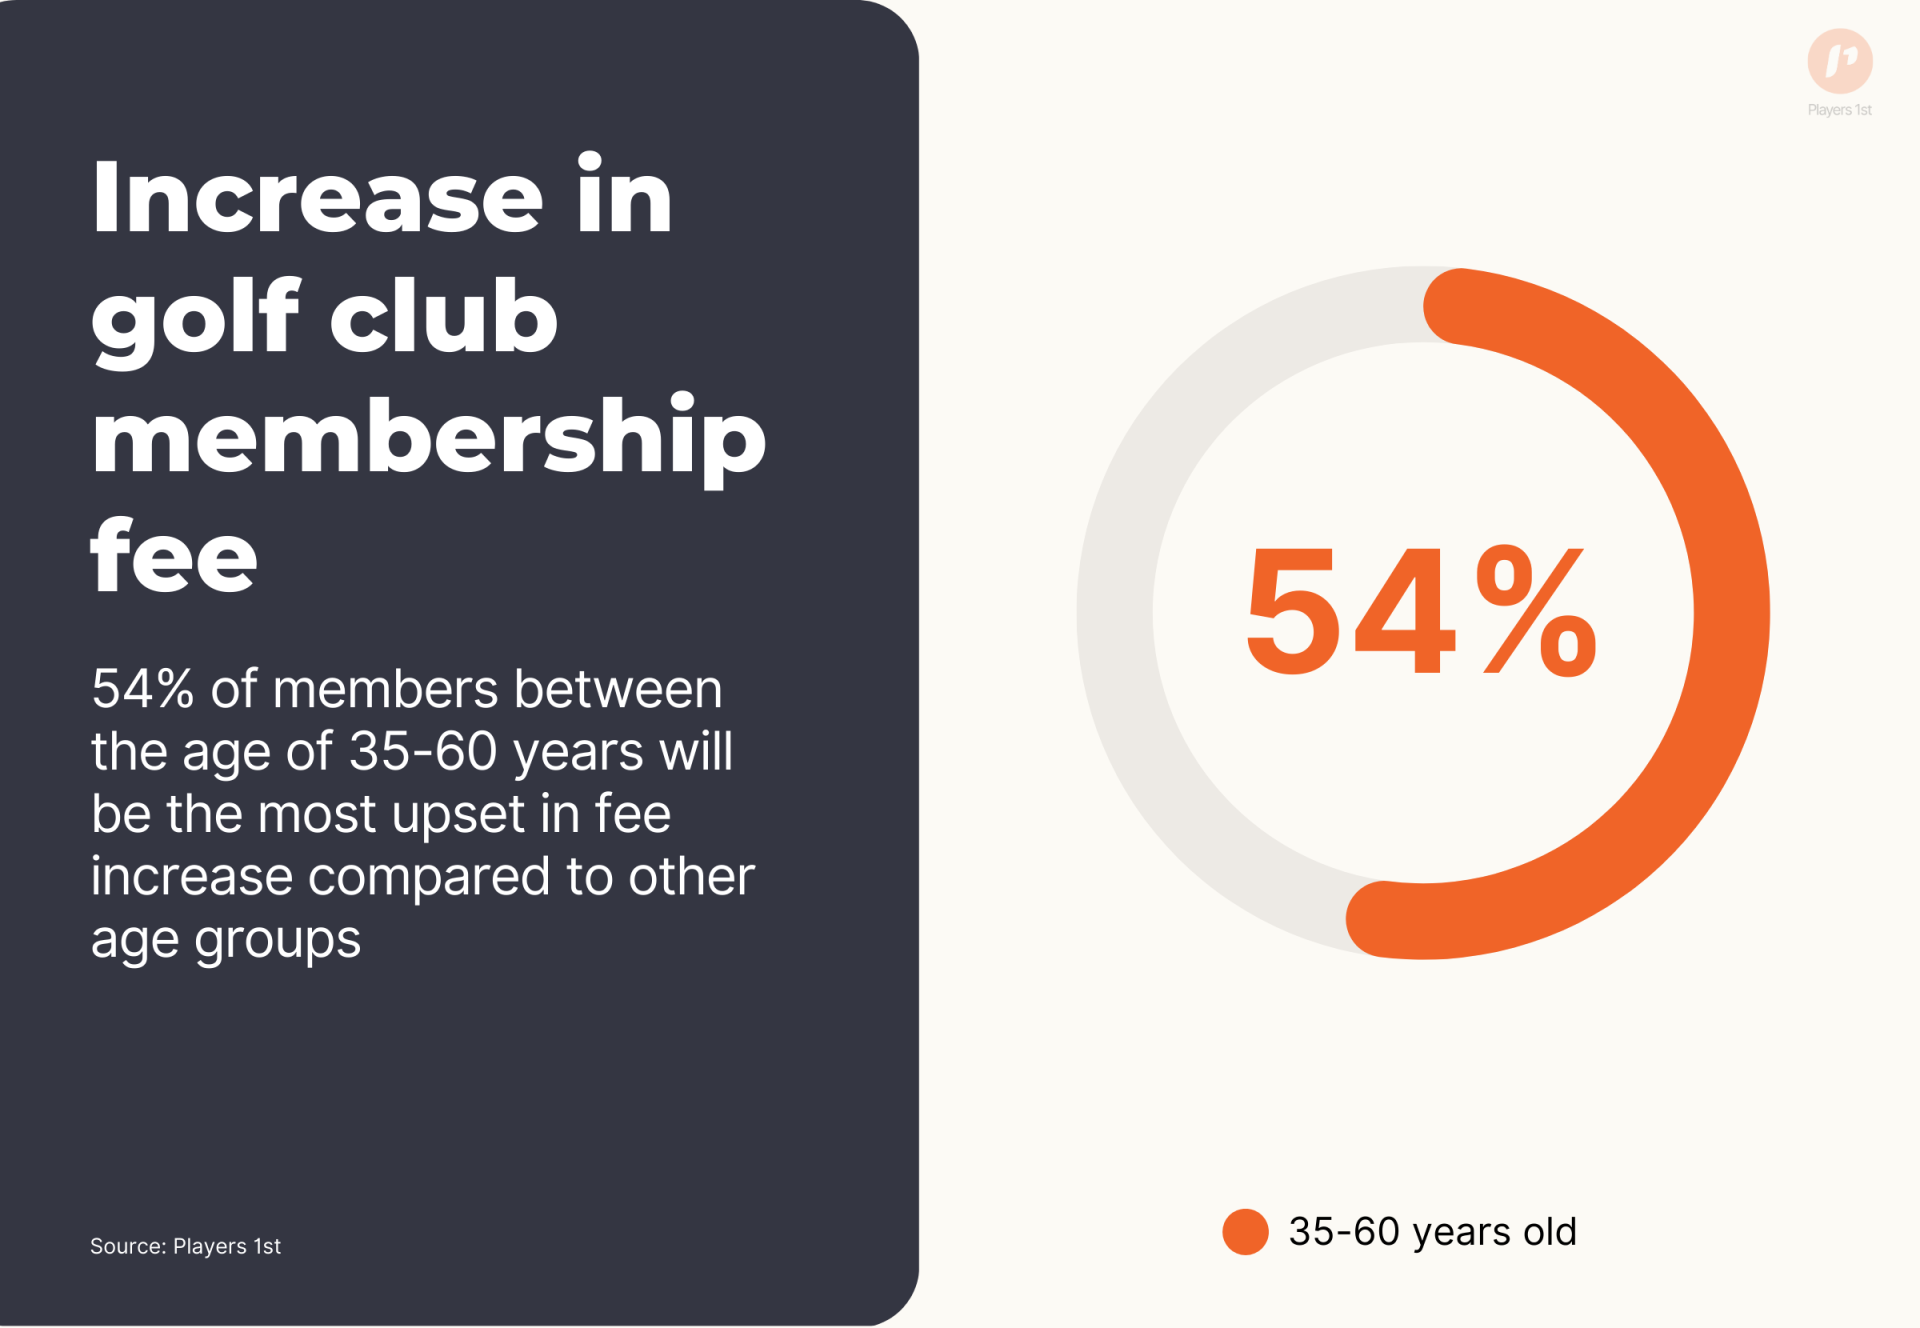 Increase in golf club membership fee. 54% of members between the age of 35-60 years will be the most upset in fee increase compared to other age groups.